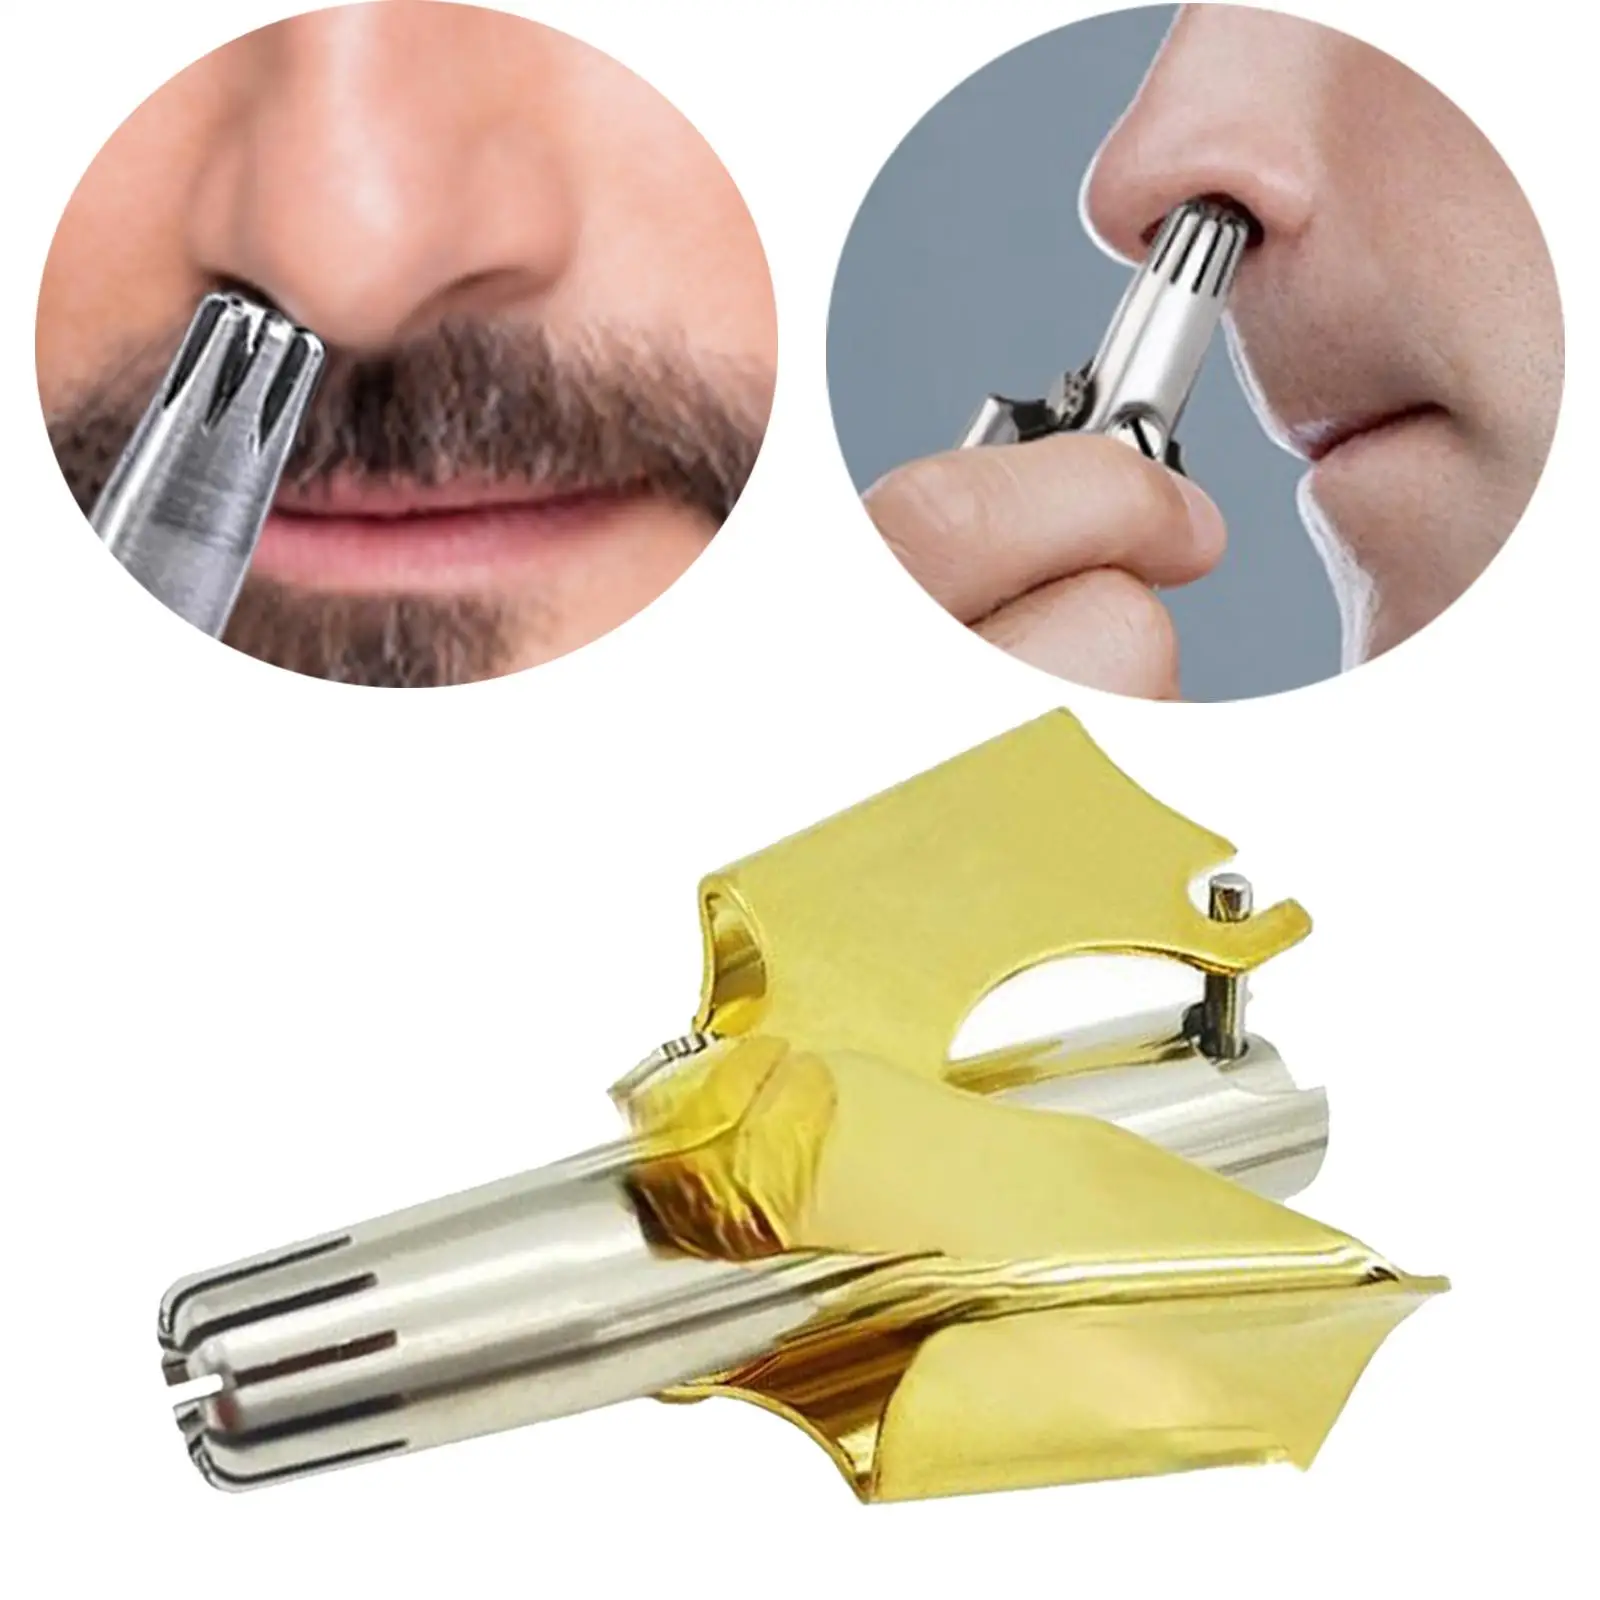 Stainless Steel Manual Nose Trimmer Washable Nose Razor Shaver No Batteries Required Ear Hair Cutter Gifts